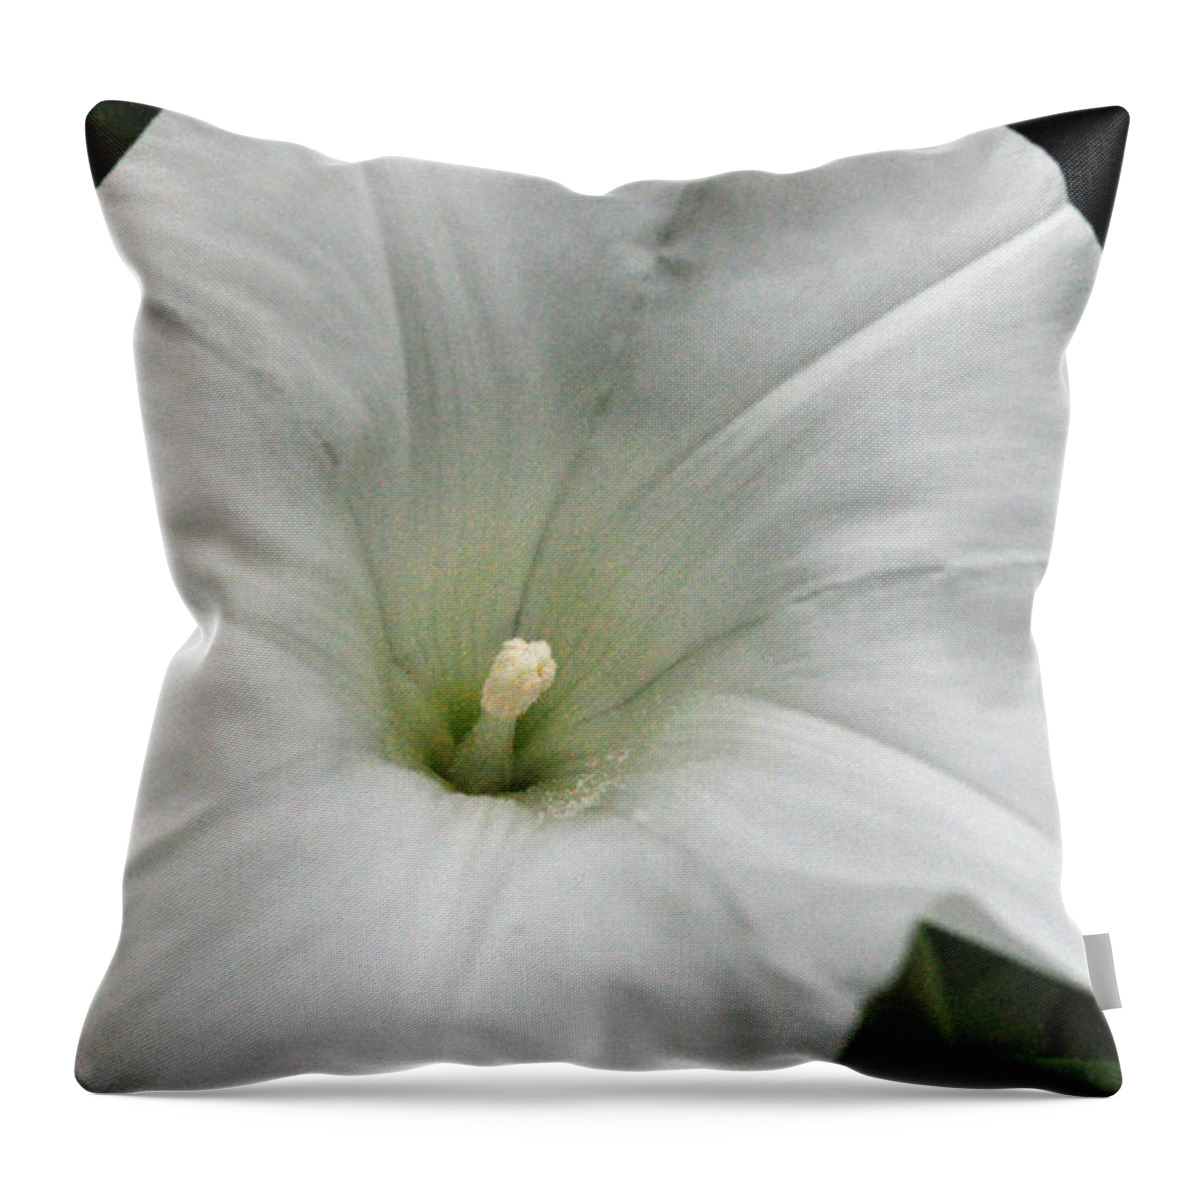 Floral Throw Pillow featuring the photograph Hedge Morning Glory by Tikvah's Hope